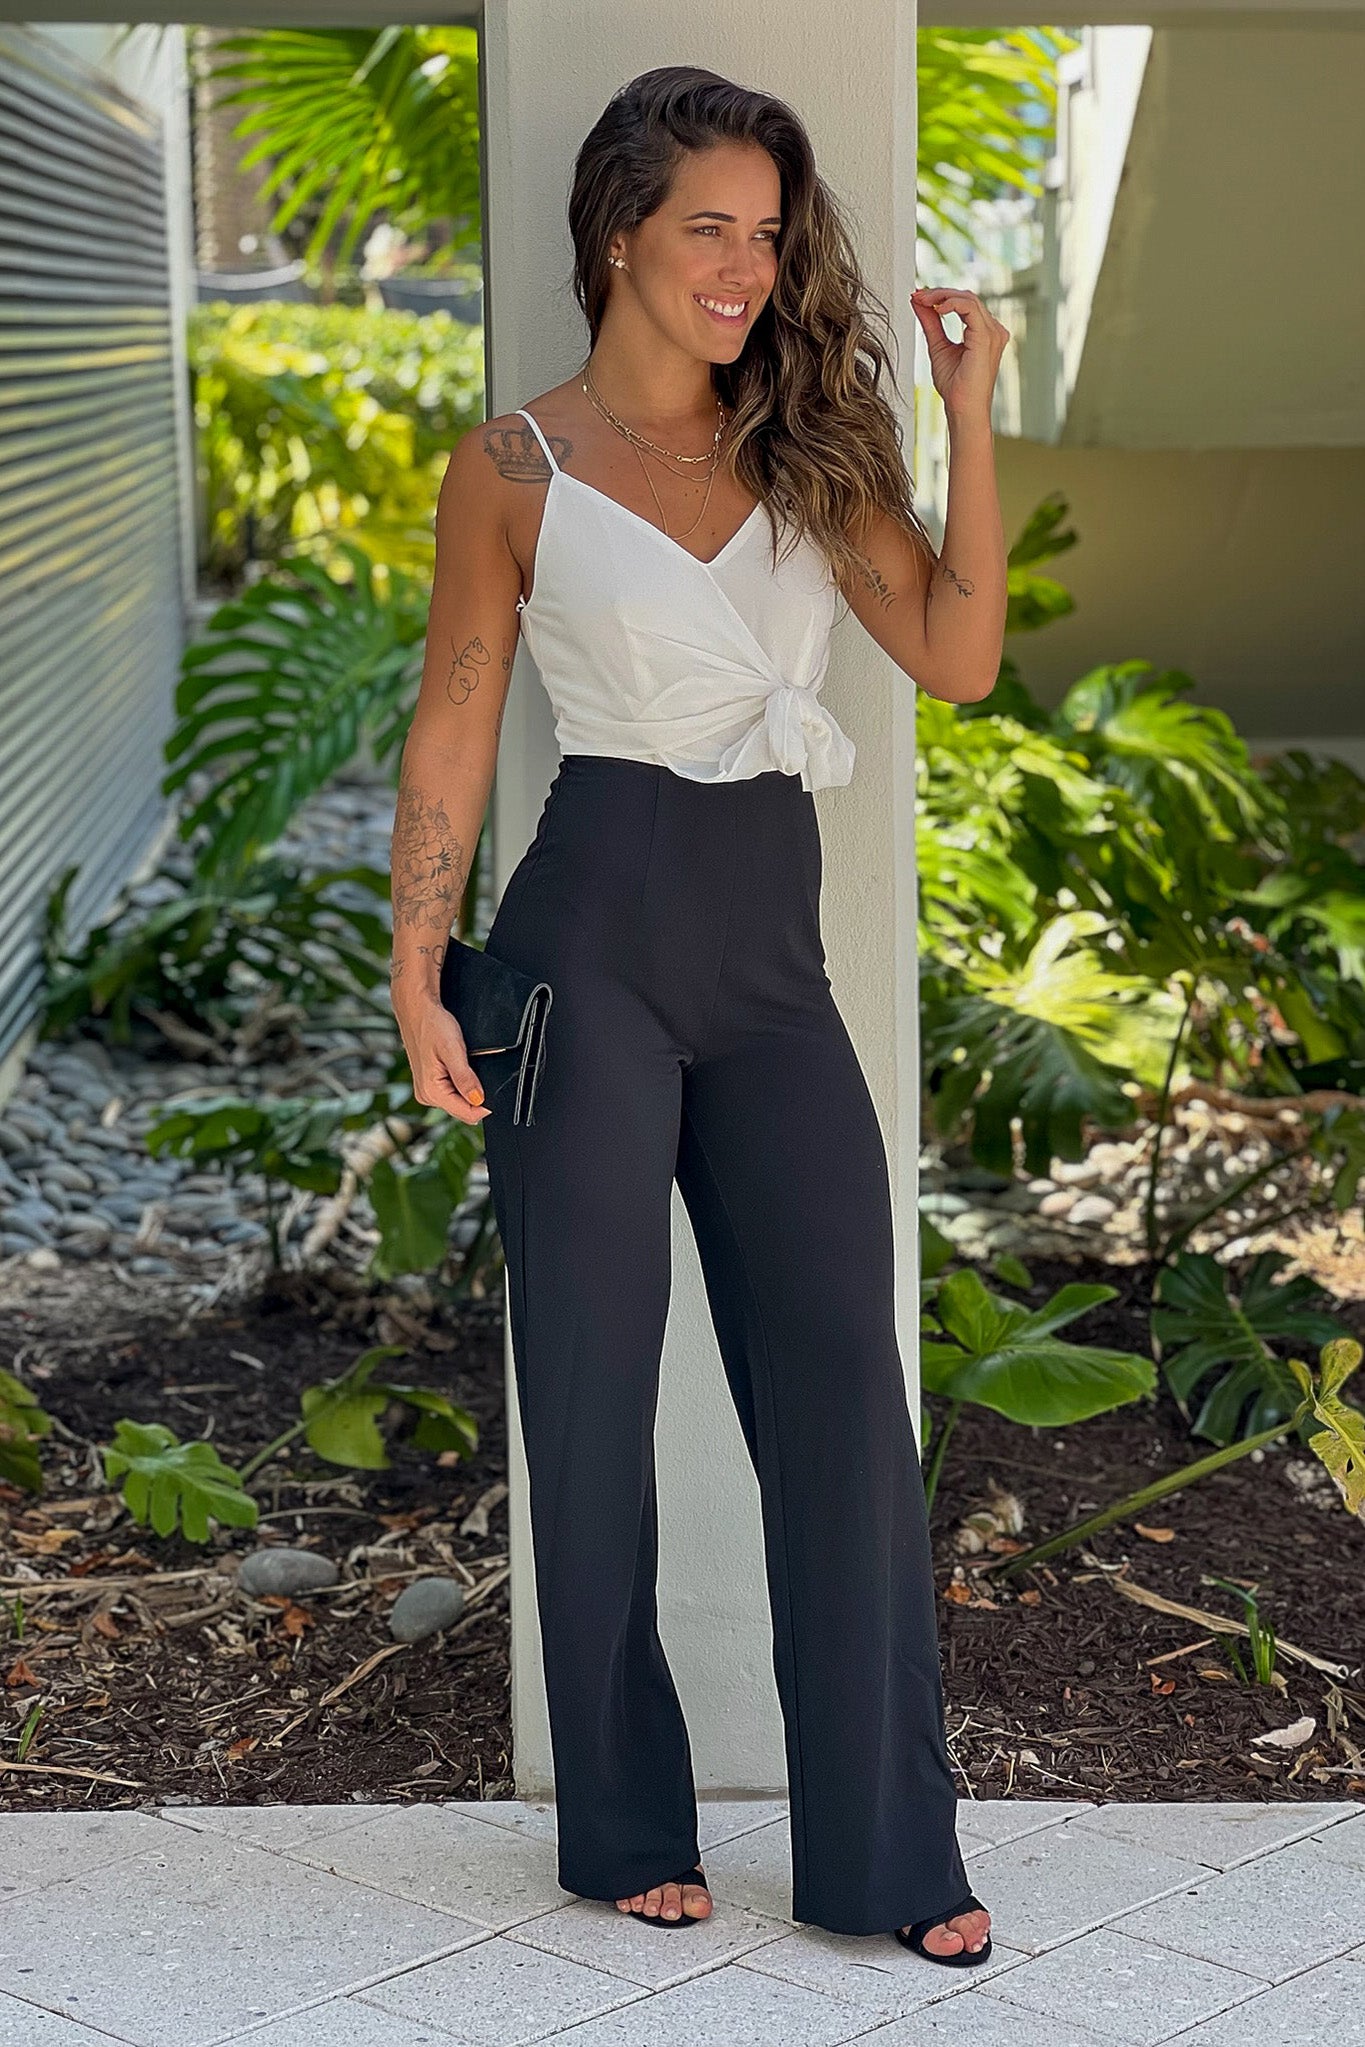 off white and black formal jumpsuit